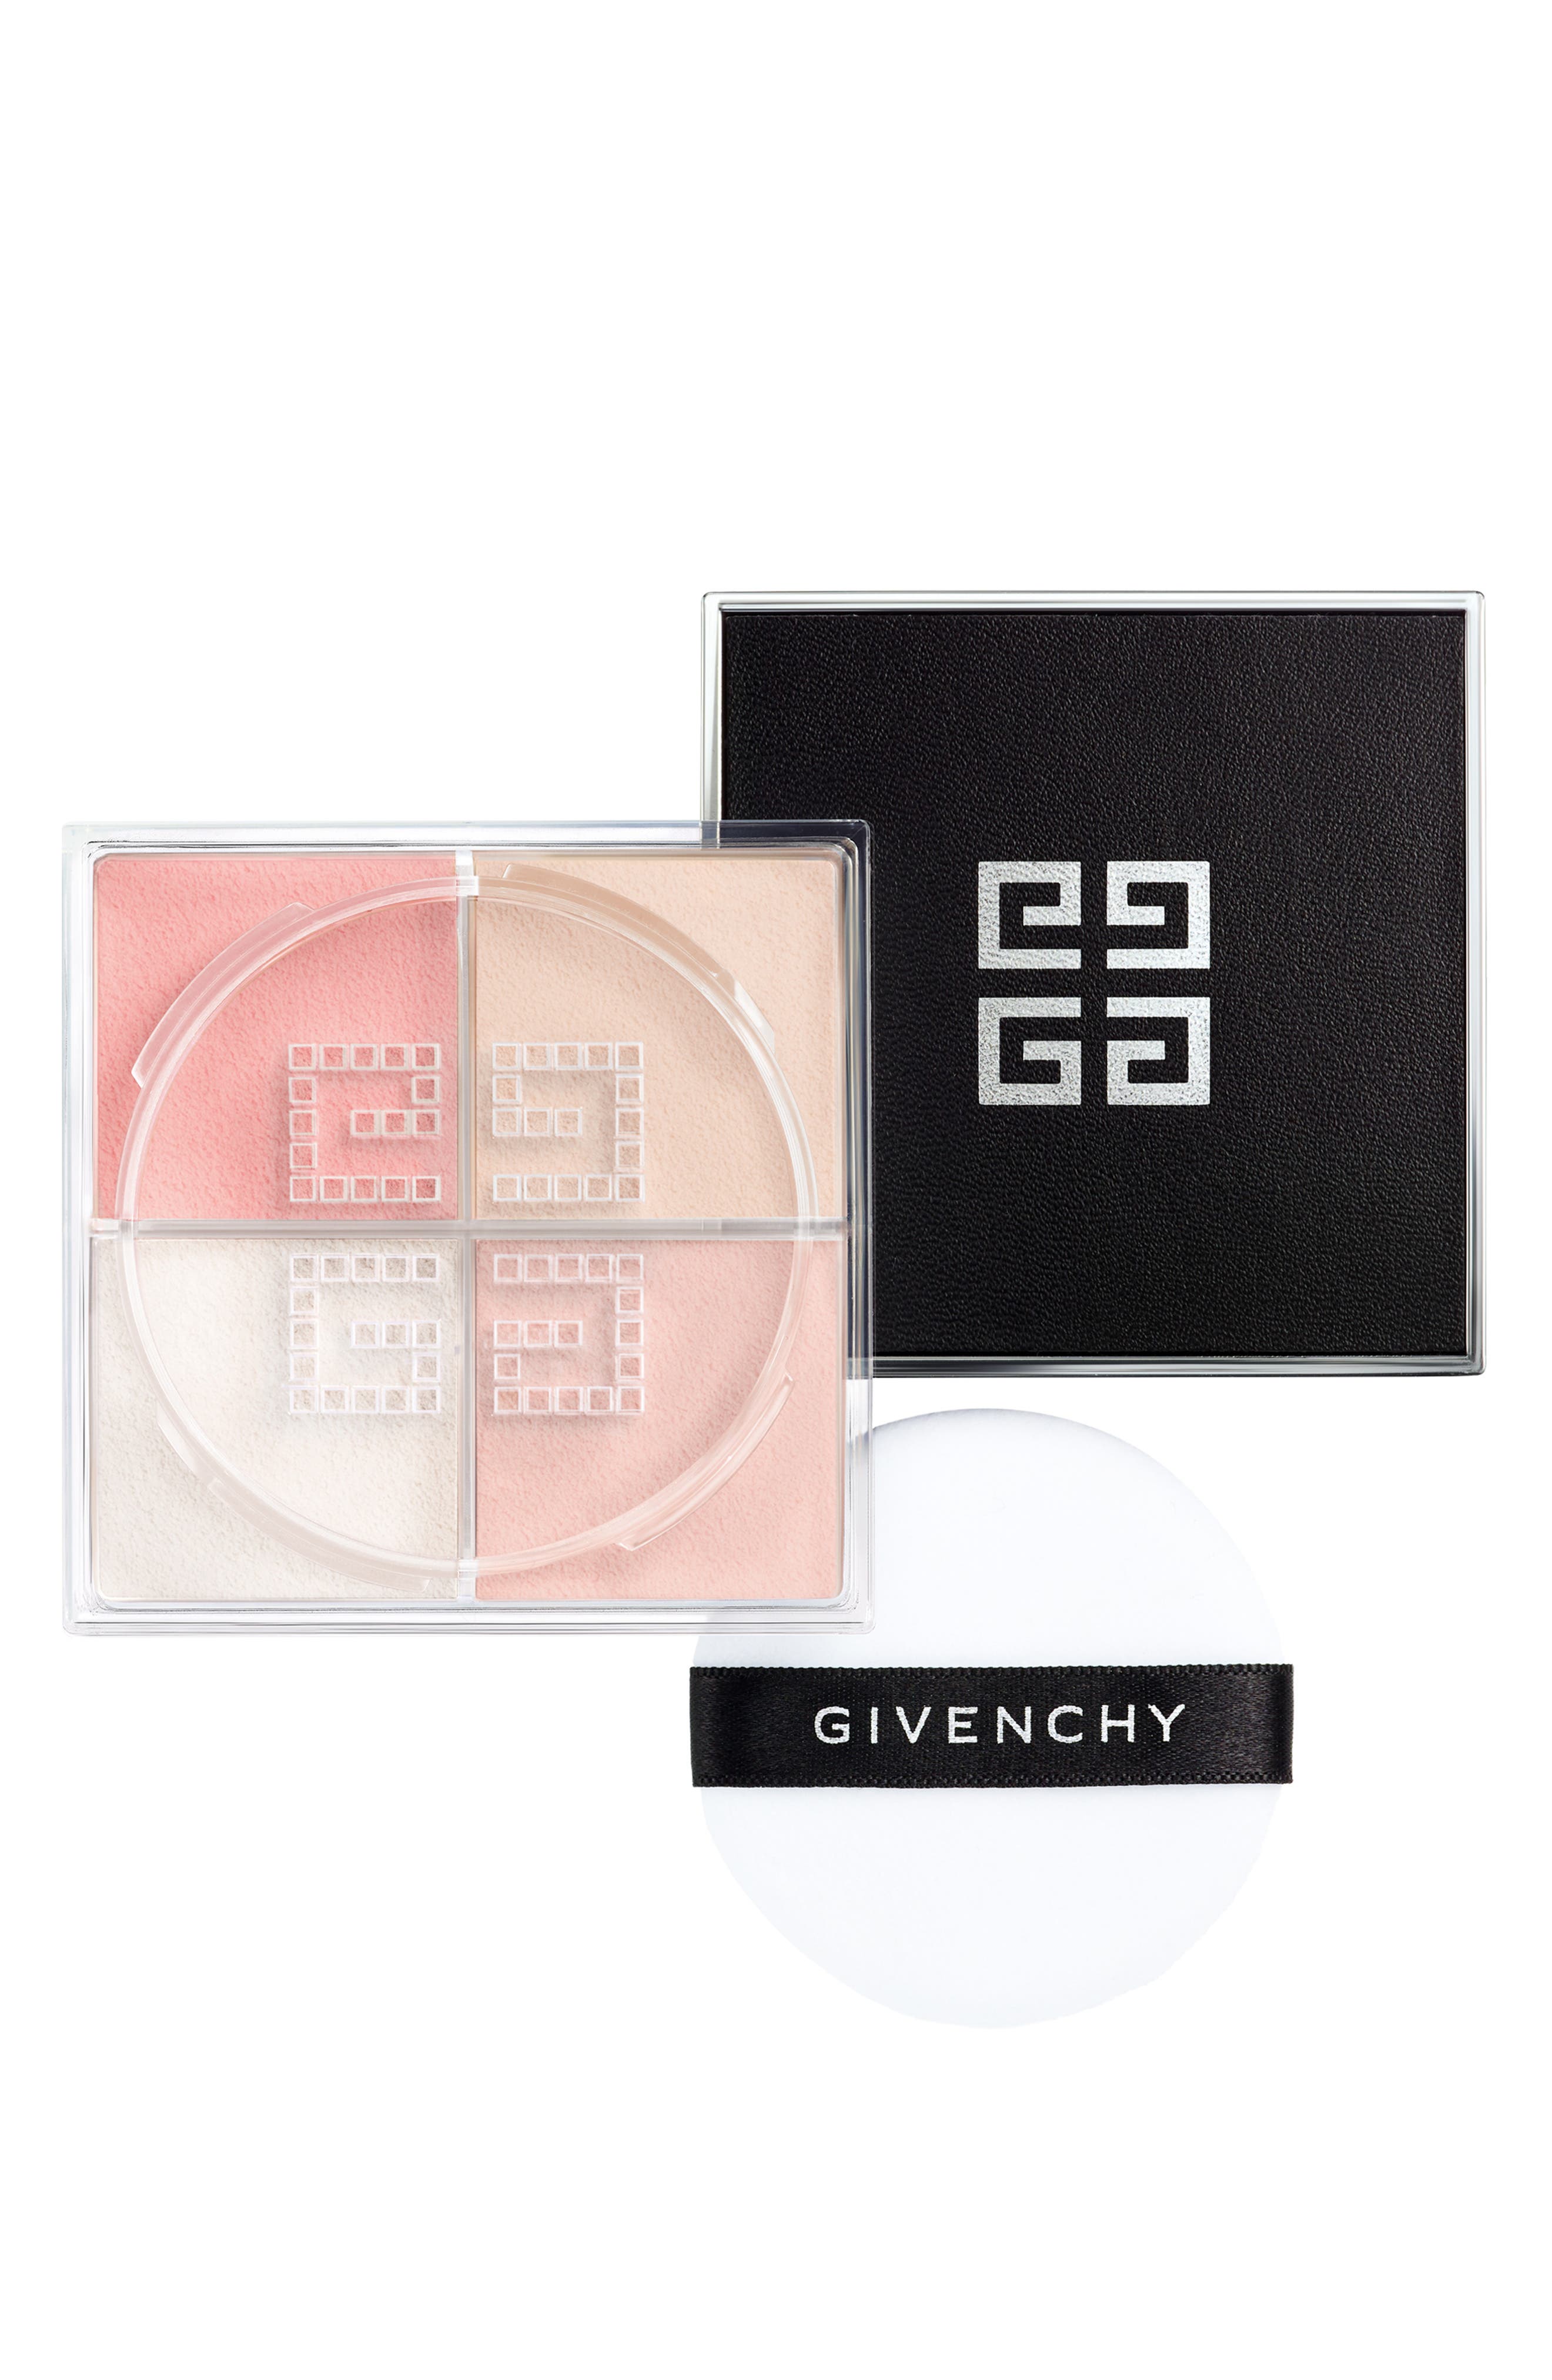 EAN 3274872368613 product image for Givenchy Prisme Libre Finishing & Setting Powder in 7 Voile Rose at Nordstrom | upcitemdb.com